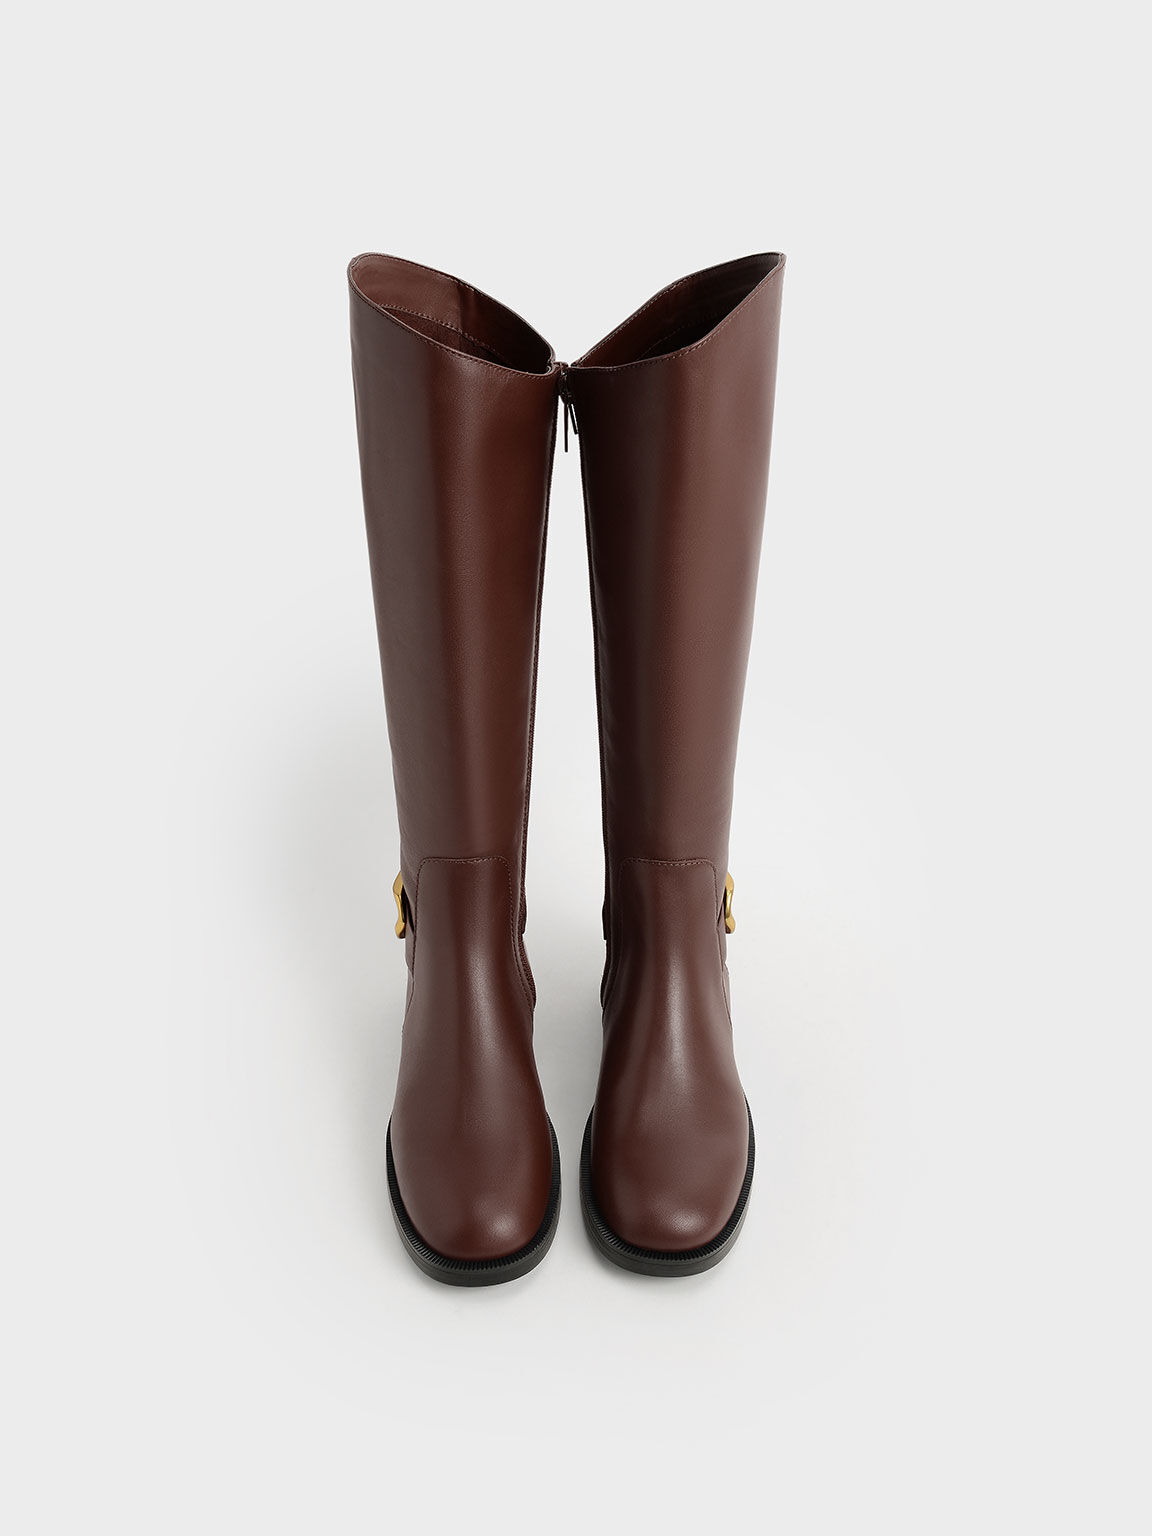 Gabine Buckled Leather Knee-High Boots, Brown, hi-res